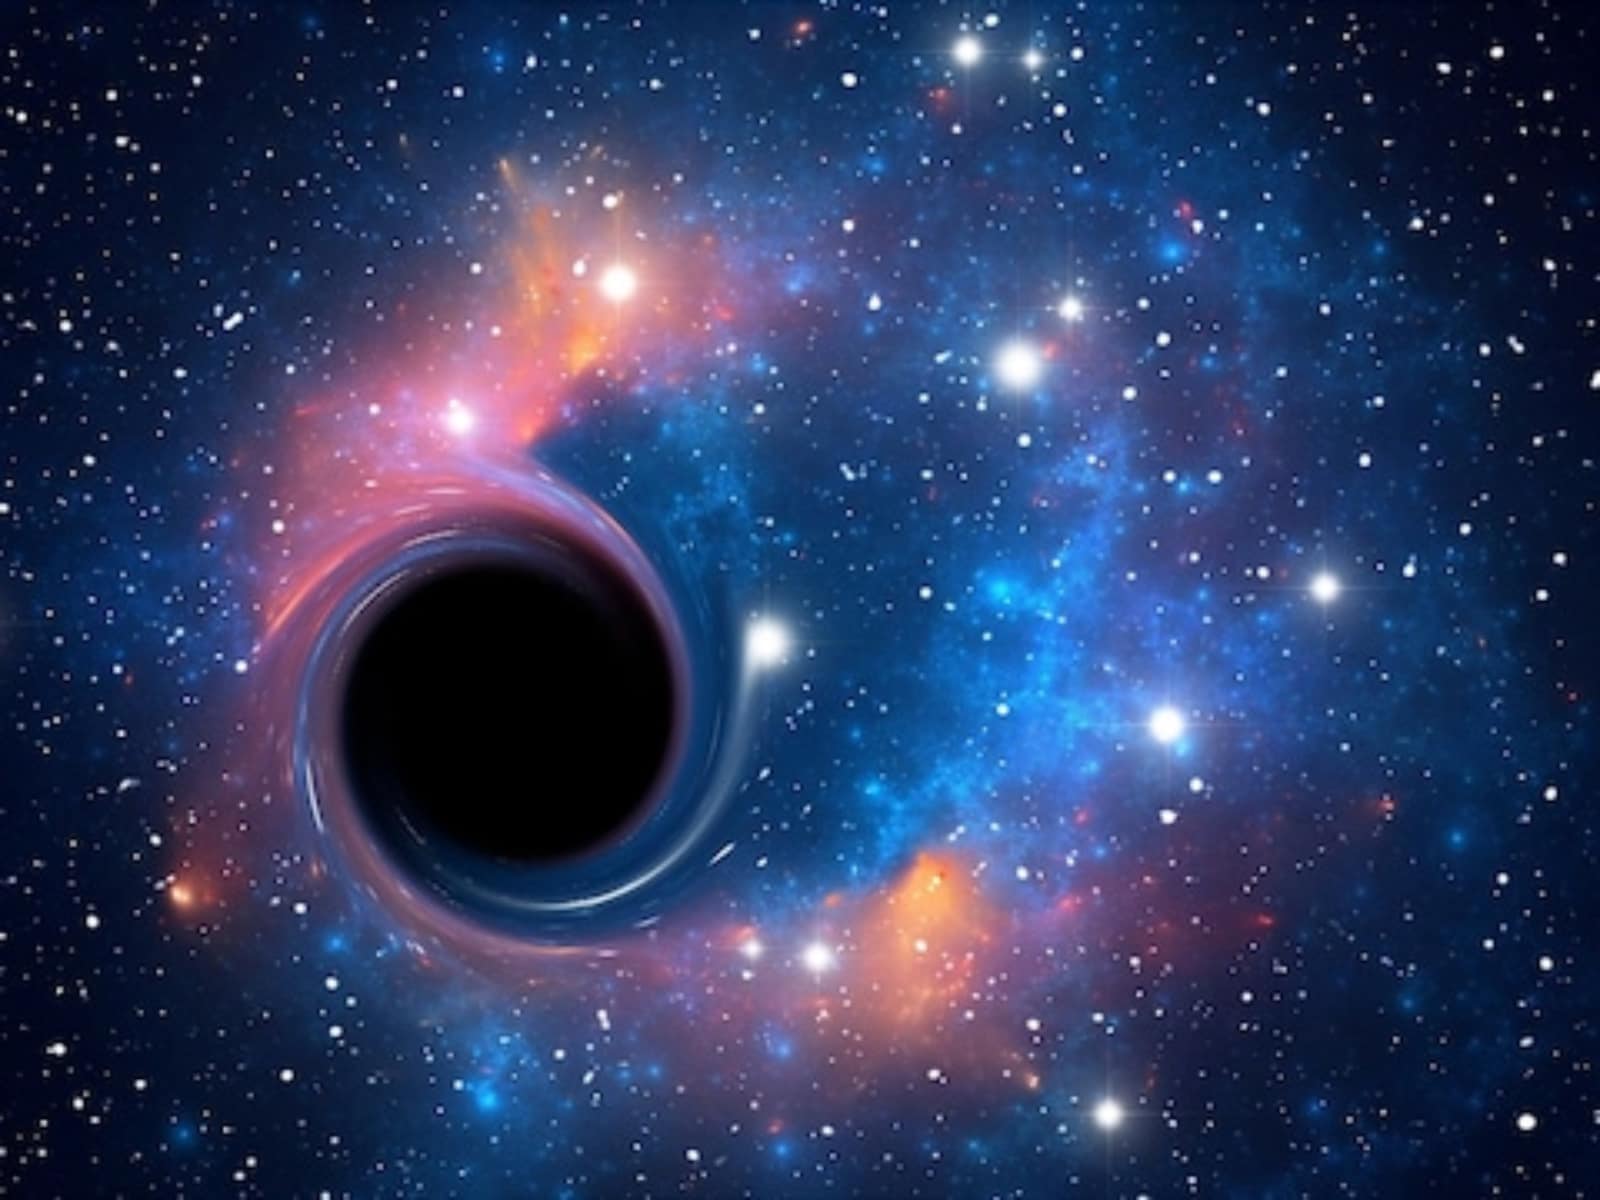 black holes national geographic